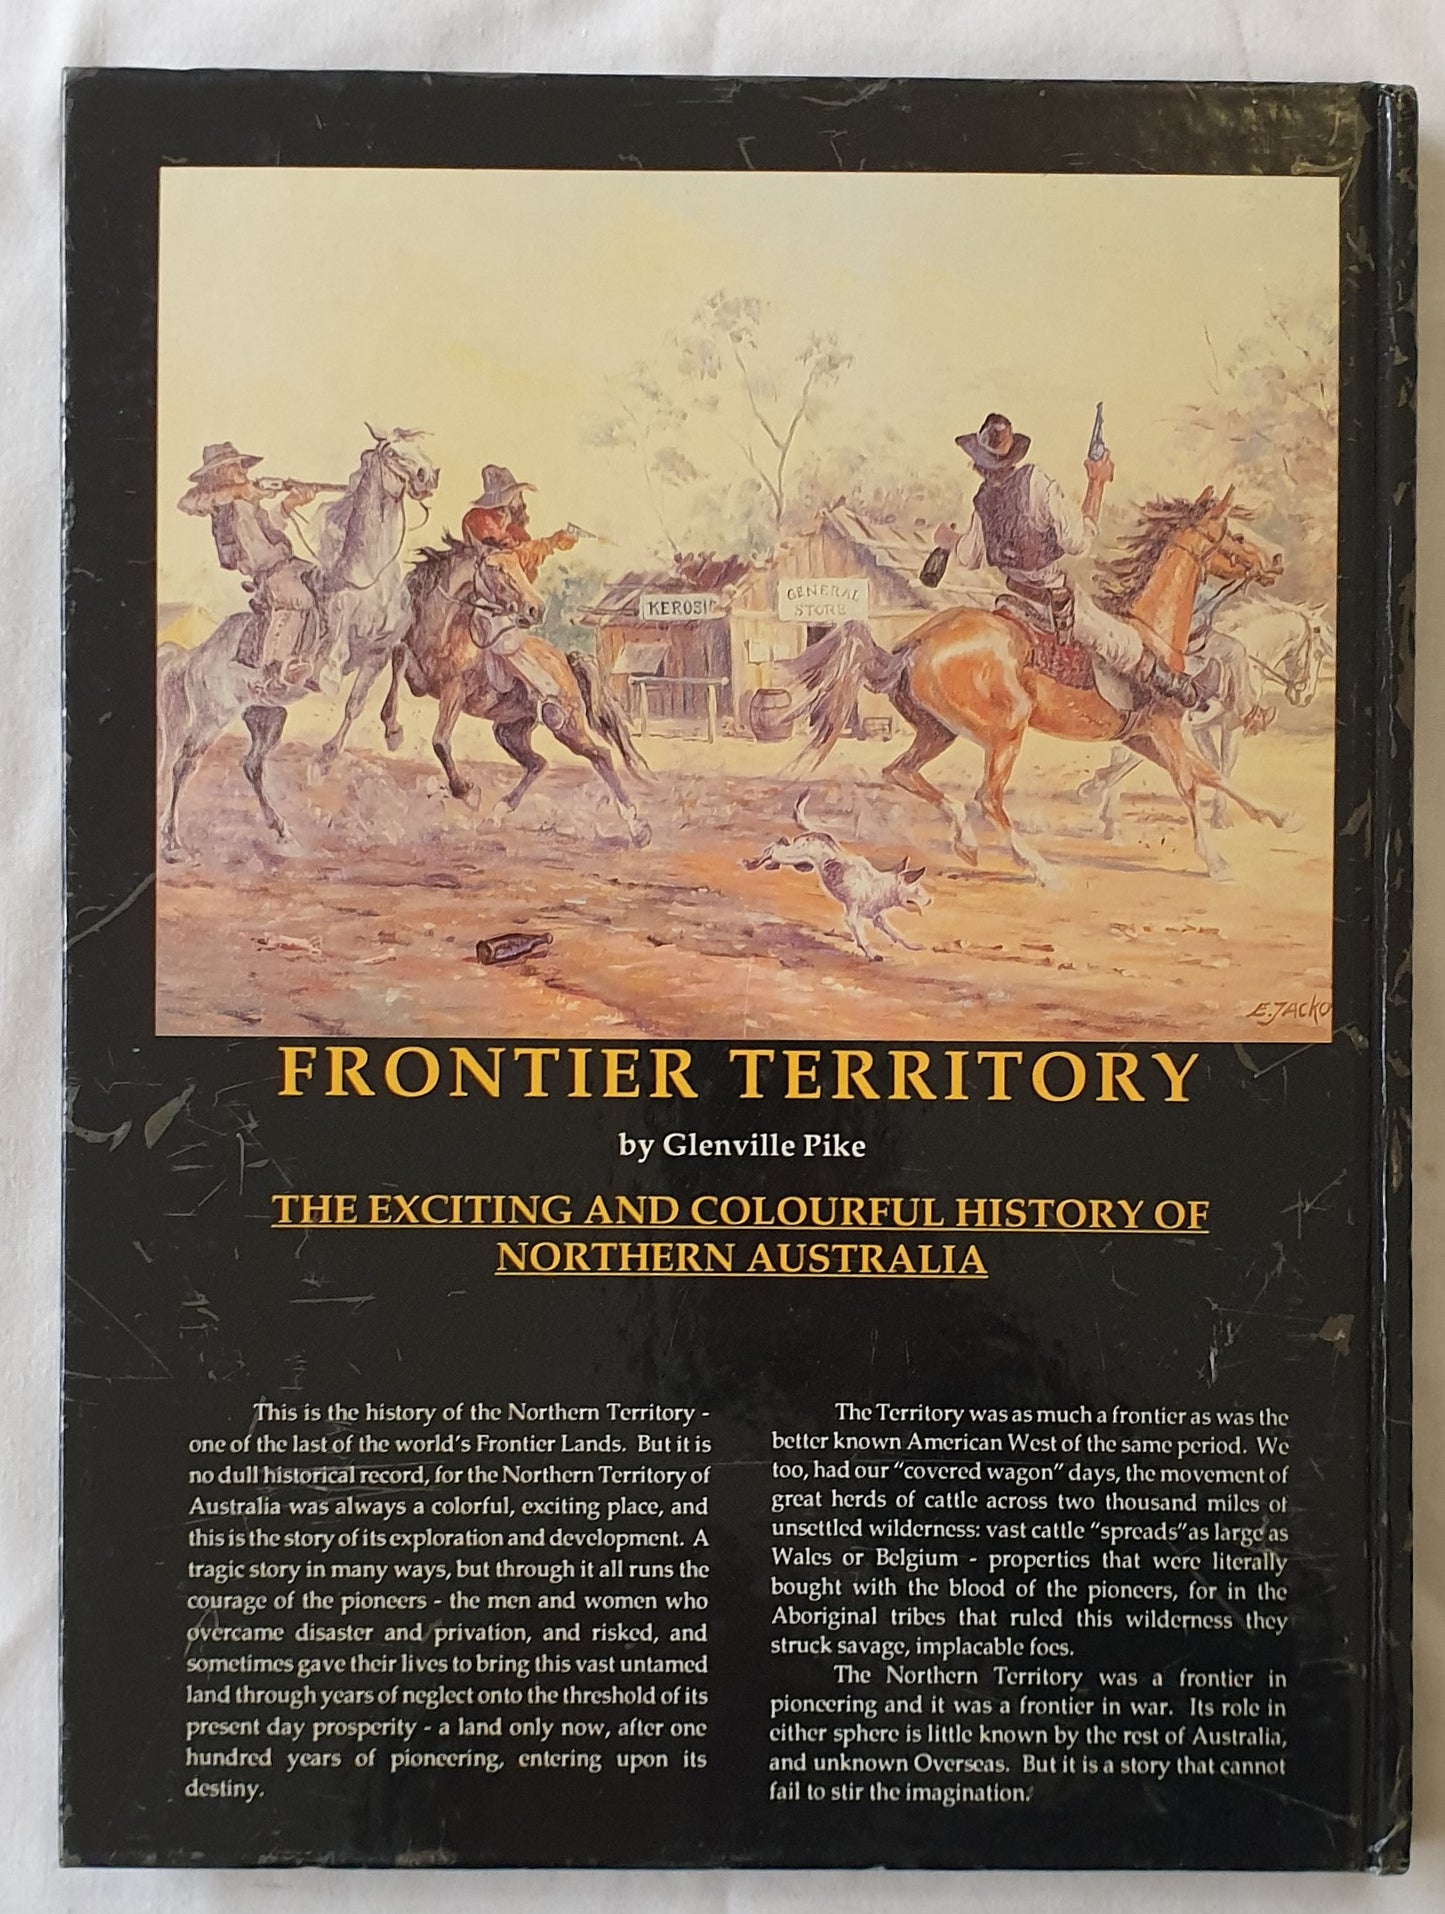 Frontier Territory by Glenville Pike